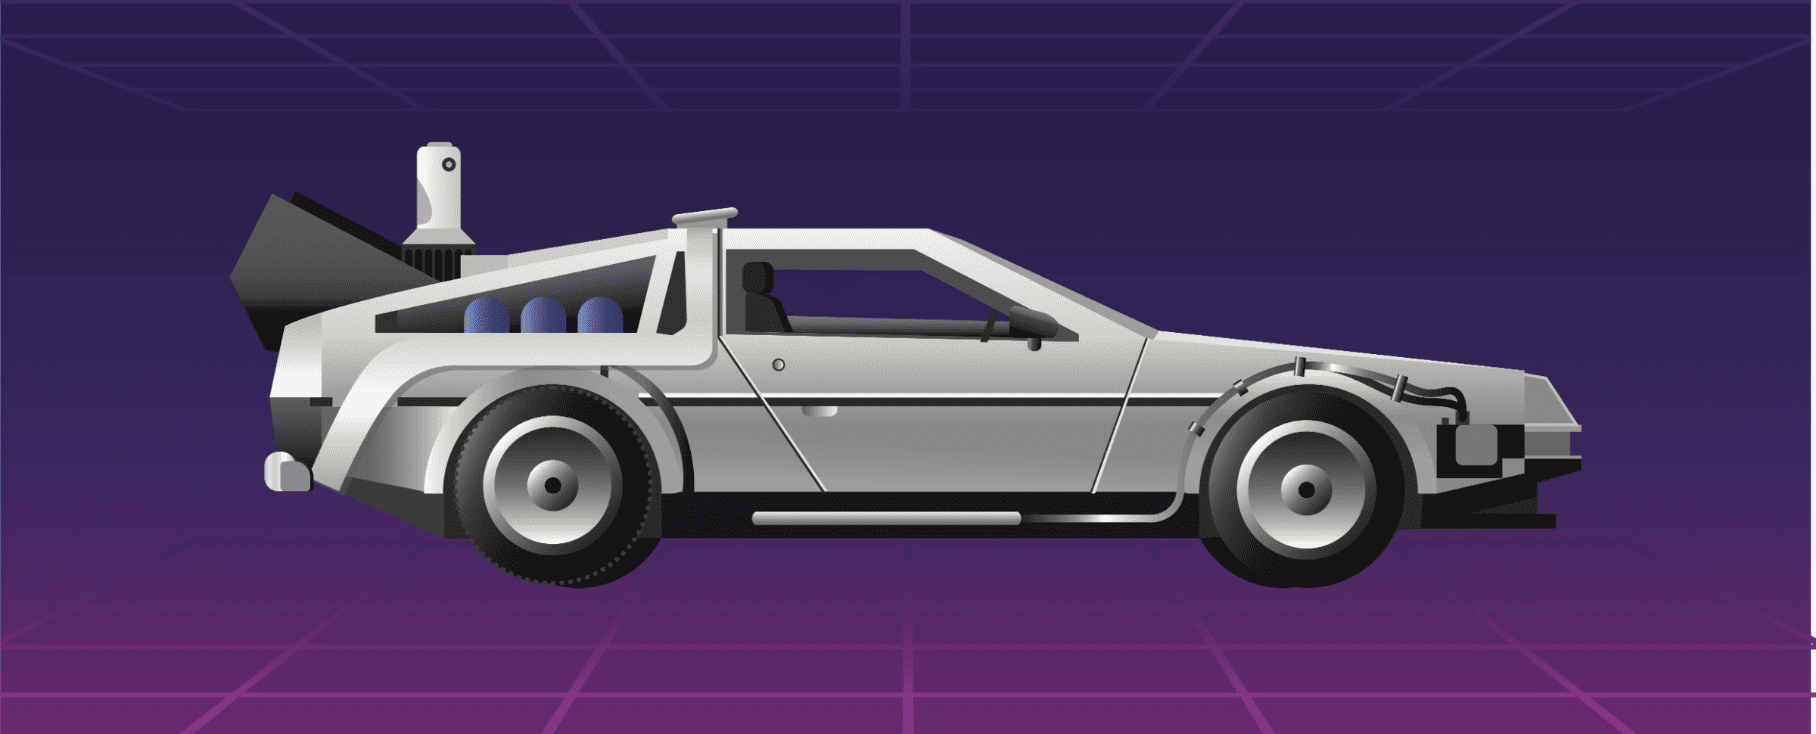 https://xyleme.com/wp-content/uploads/2023/05/delorian-back-to-the-future-blog.png